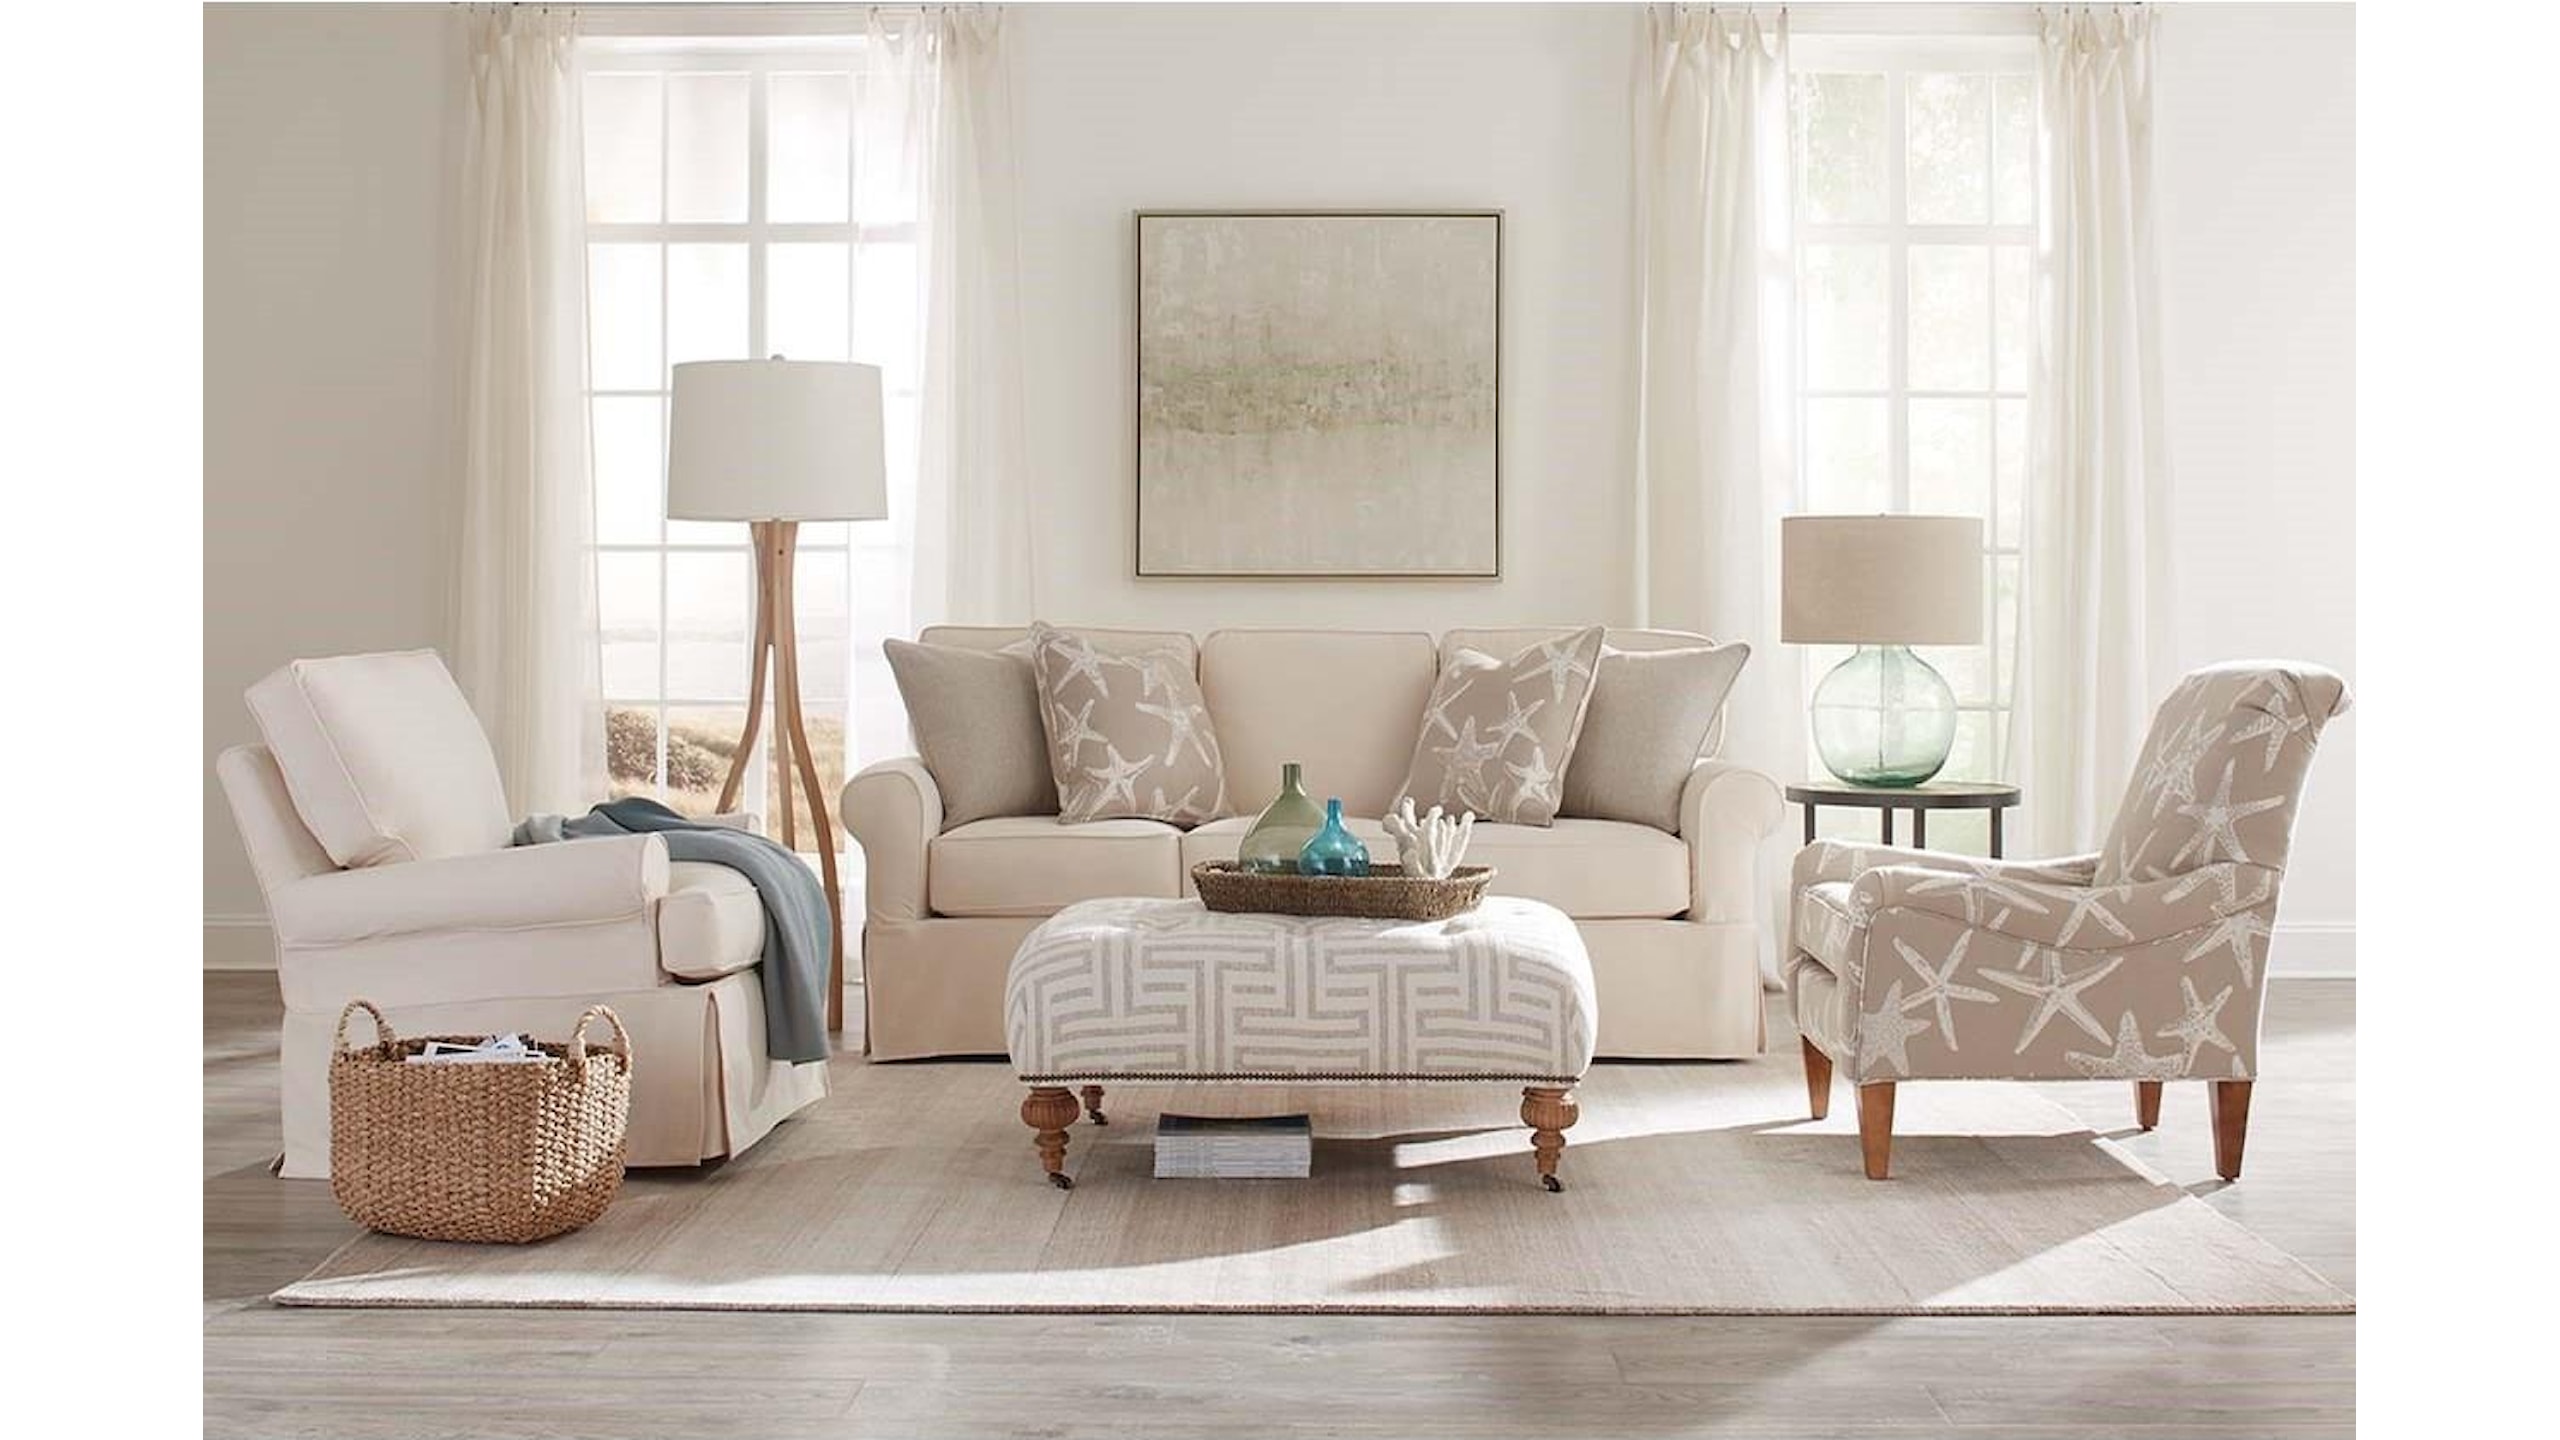 Create A Relaxed Feel With Beach Style Furniture And Dcor Baers Furniture Ft Lauderdale